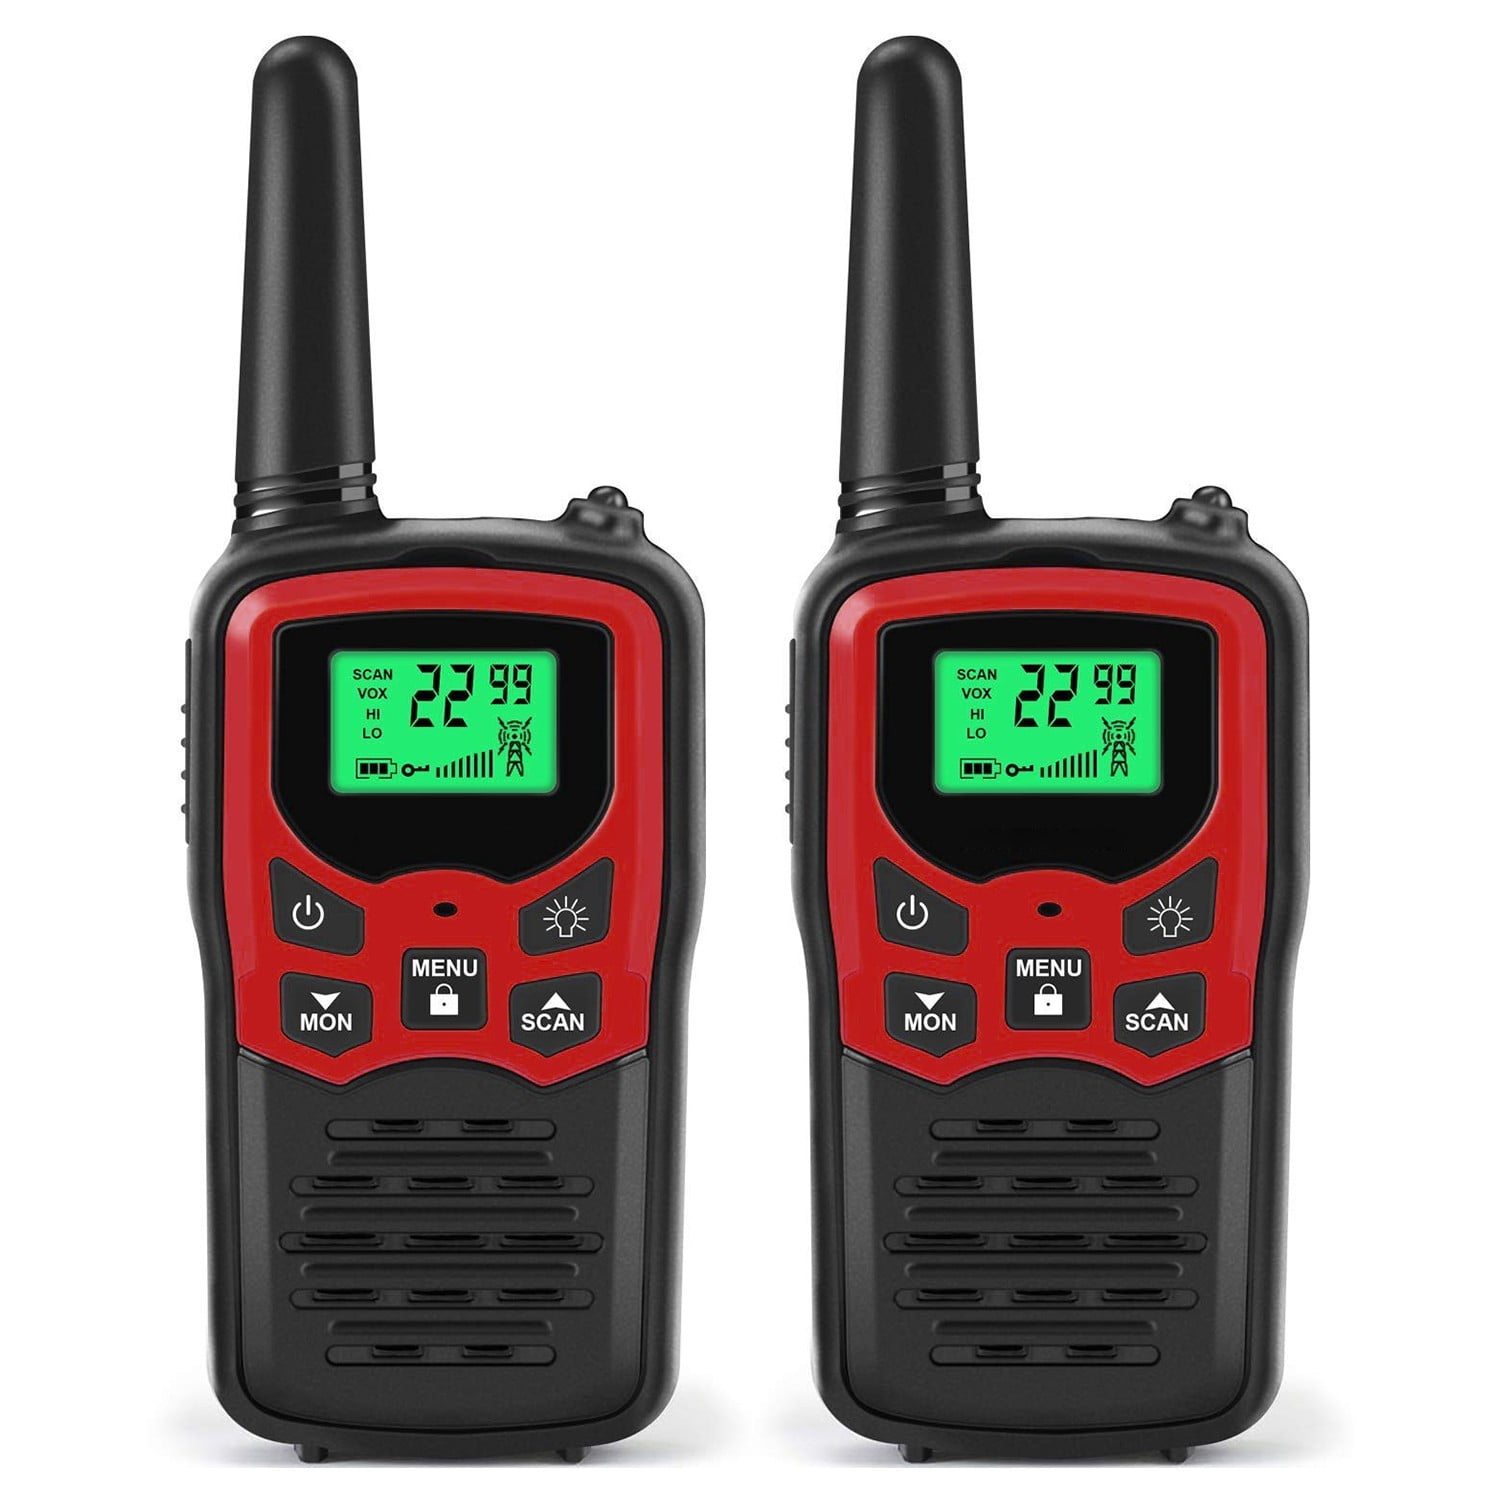 Rechargeable Two Way Radio,2 Way Radios with Earpieces Business 6 Pack Retevis RT68 Walkie Talkies Adults Long Range,FRS Handsfree Small Rugged 